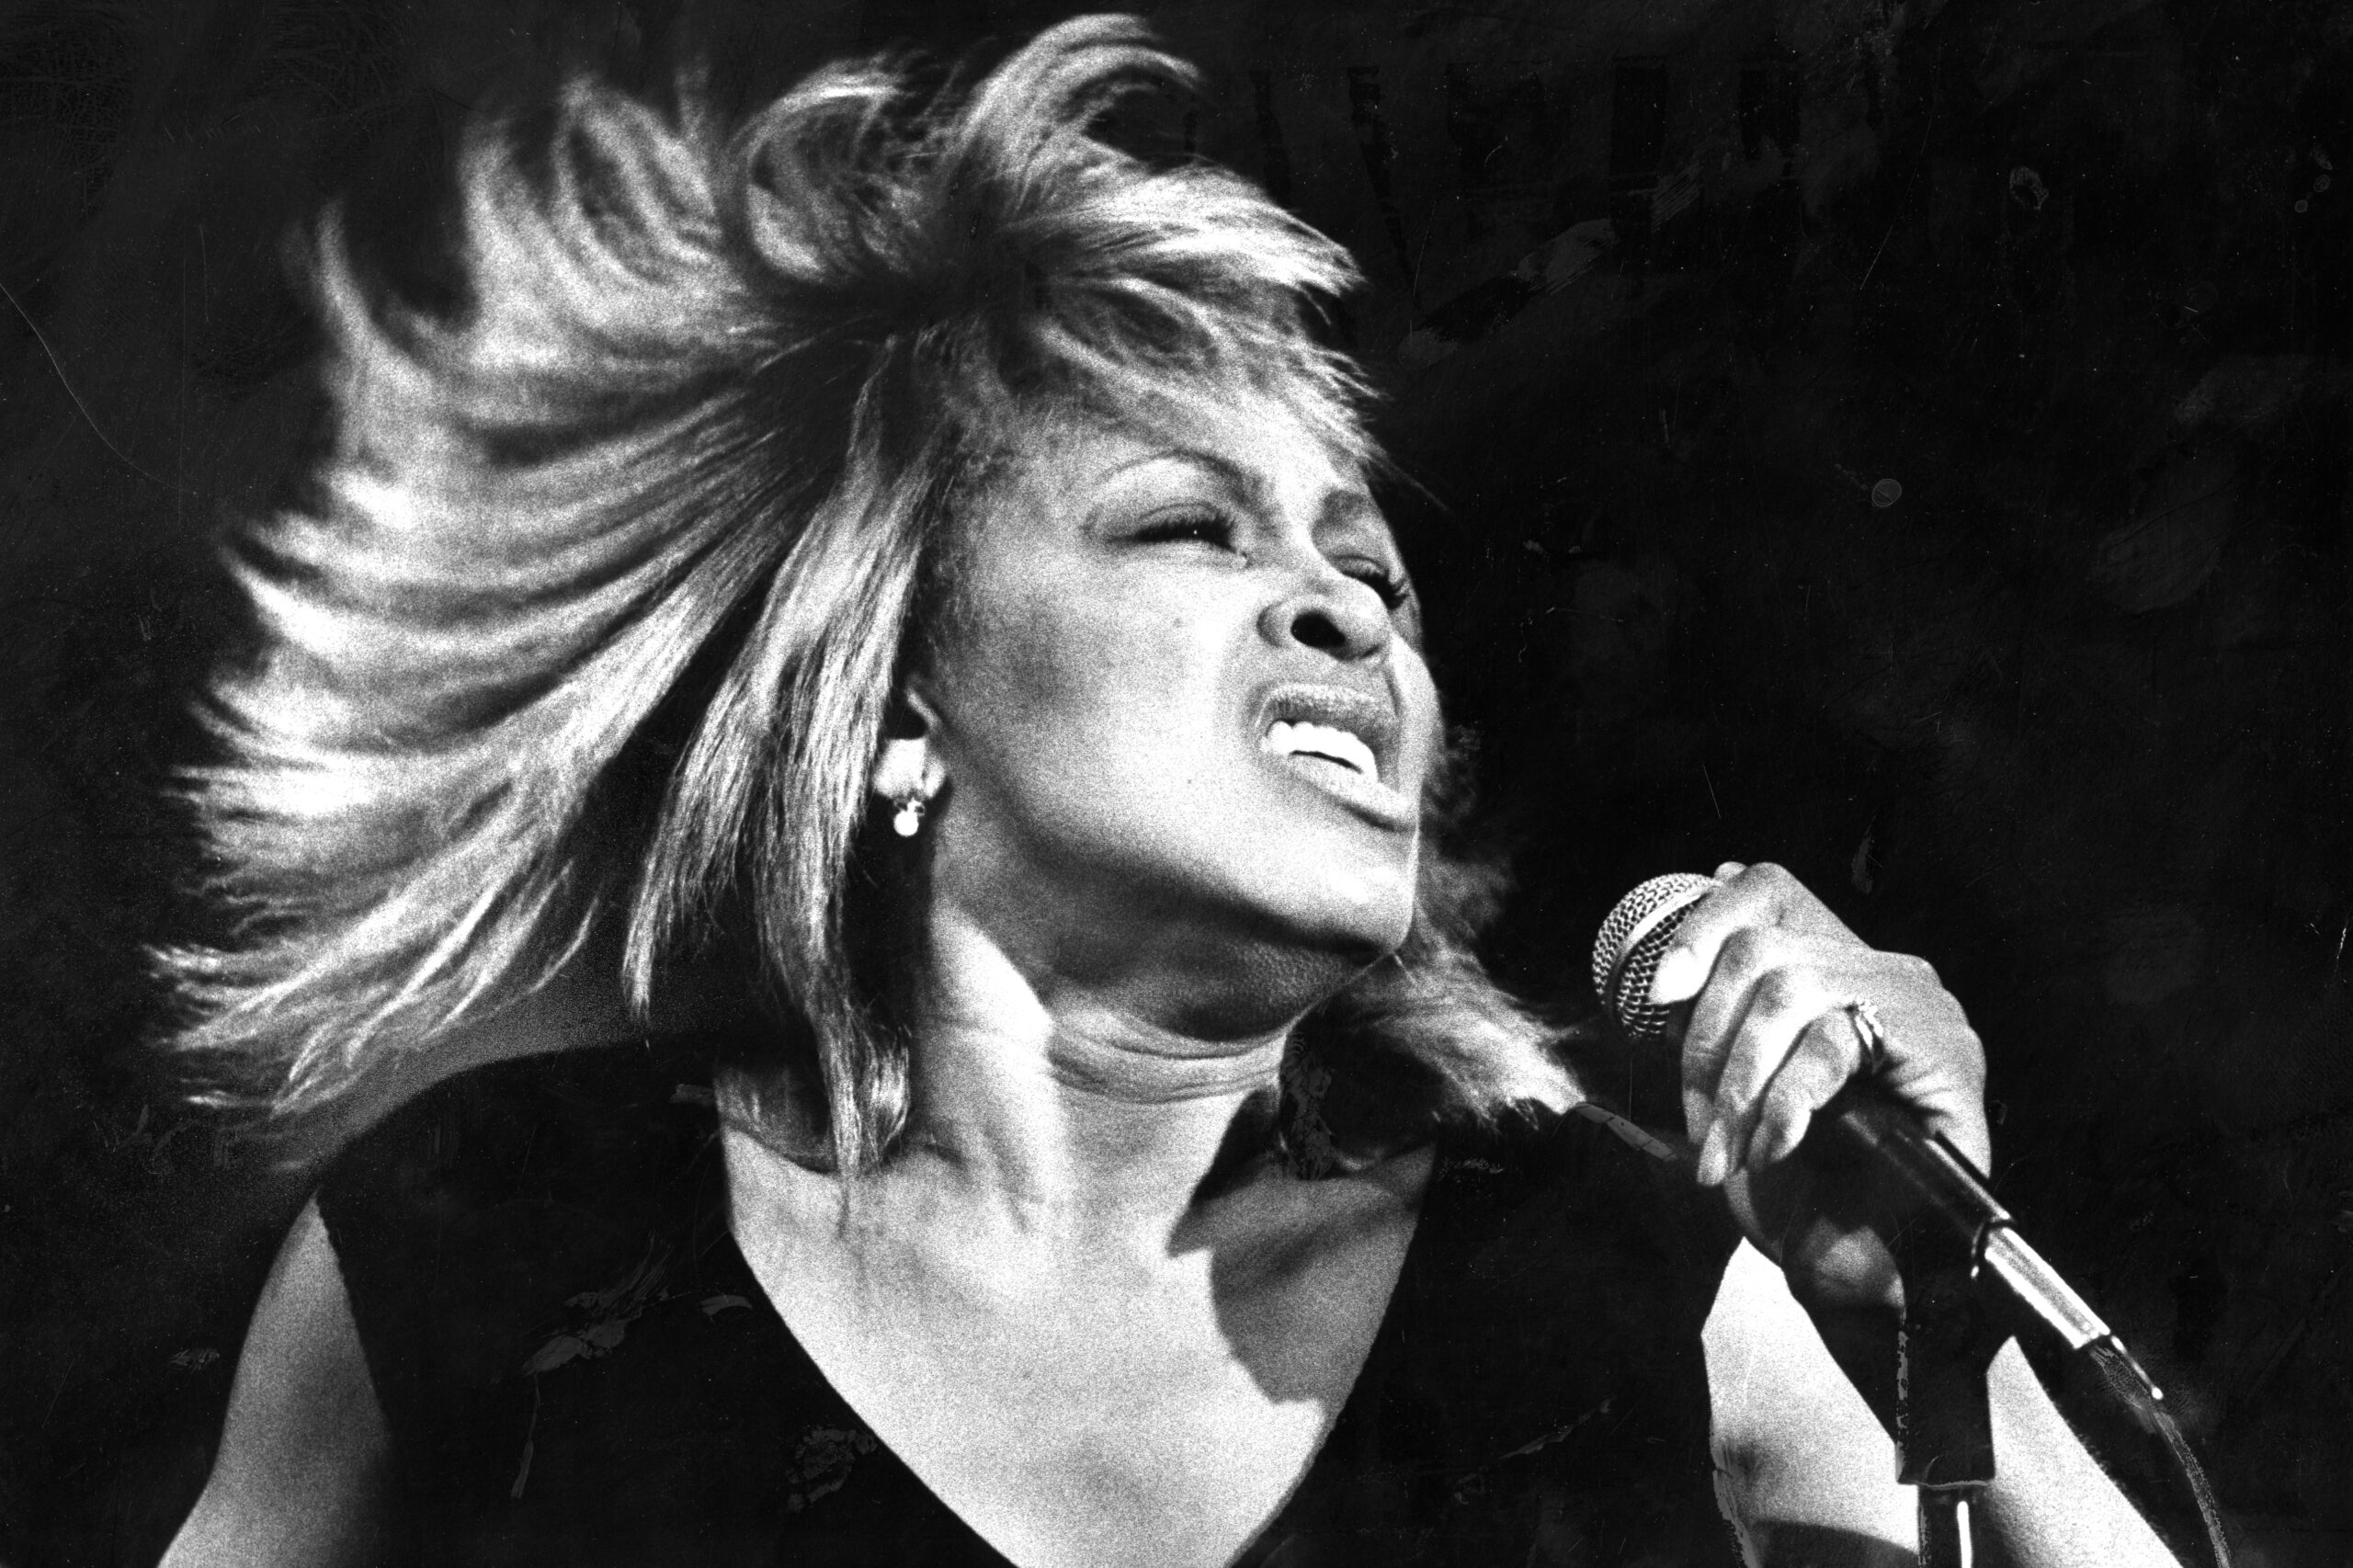 Tina Turner Performed at San Francisco Hotel Before She Was Famous